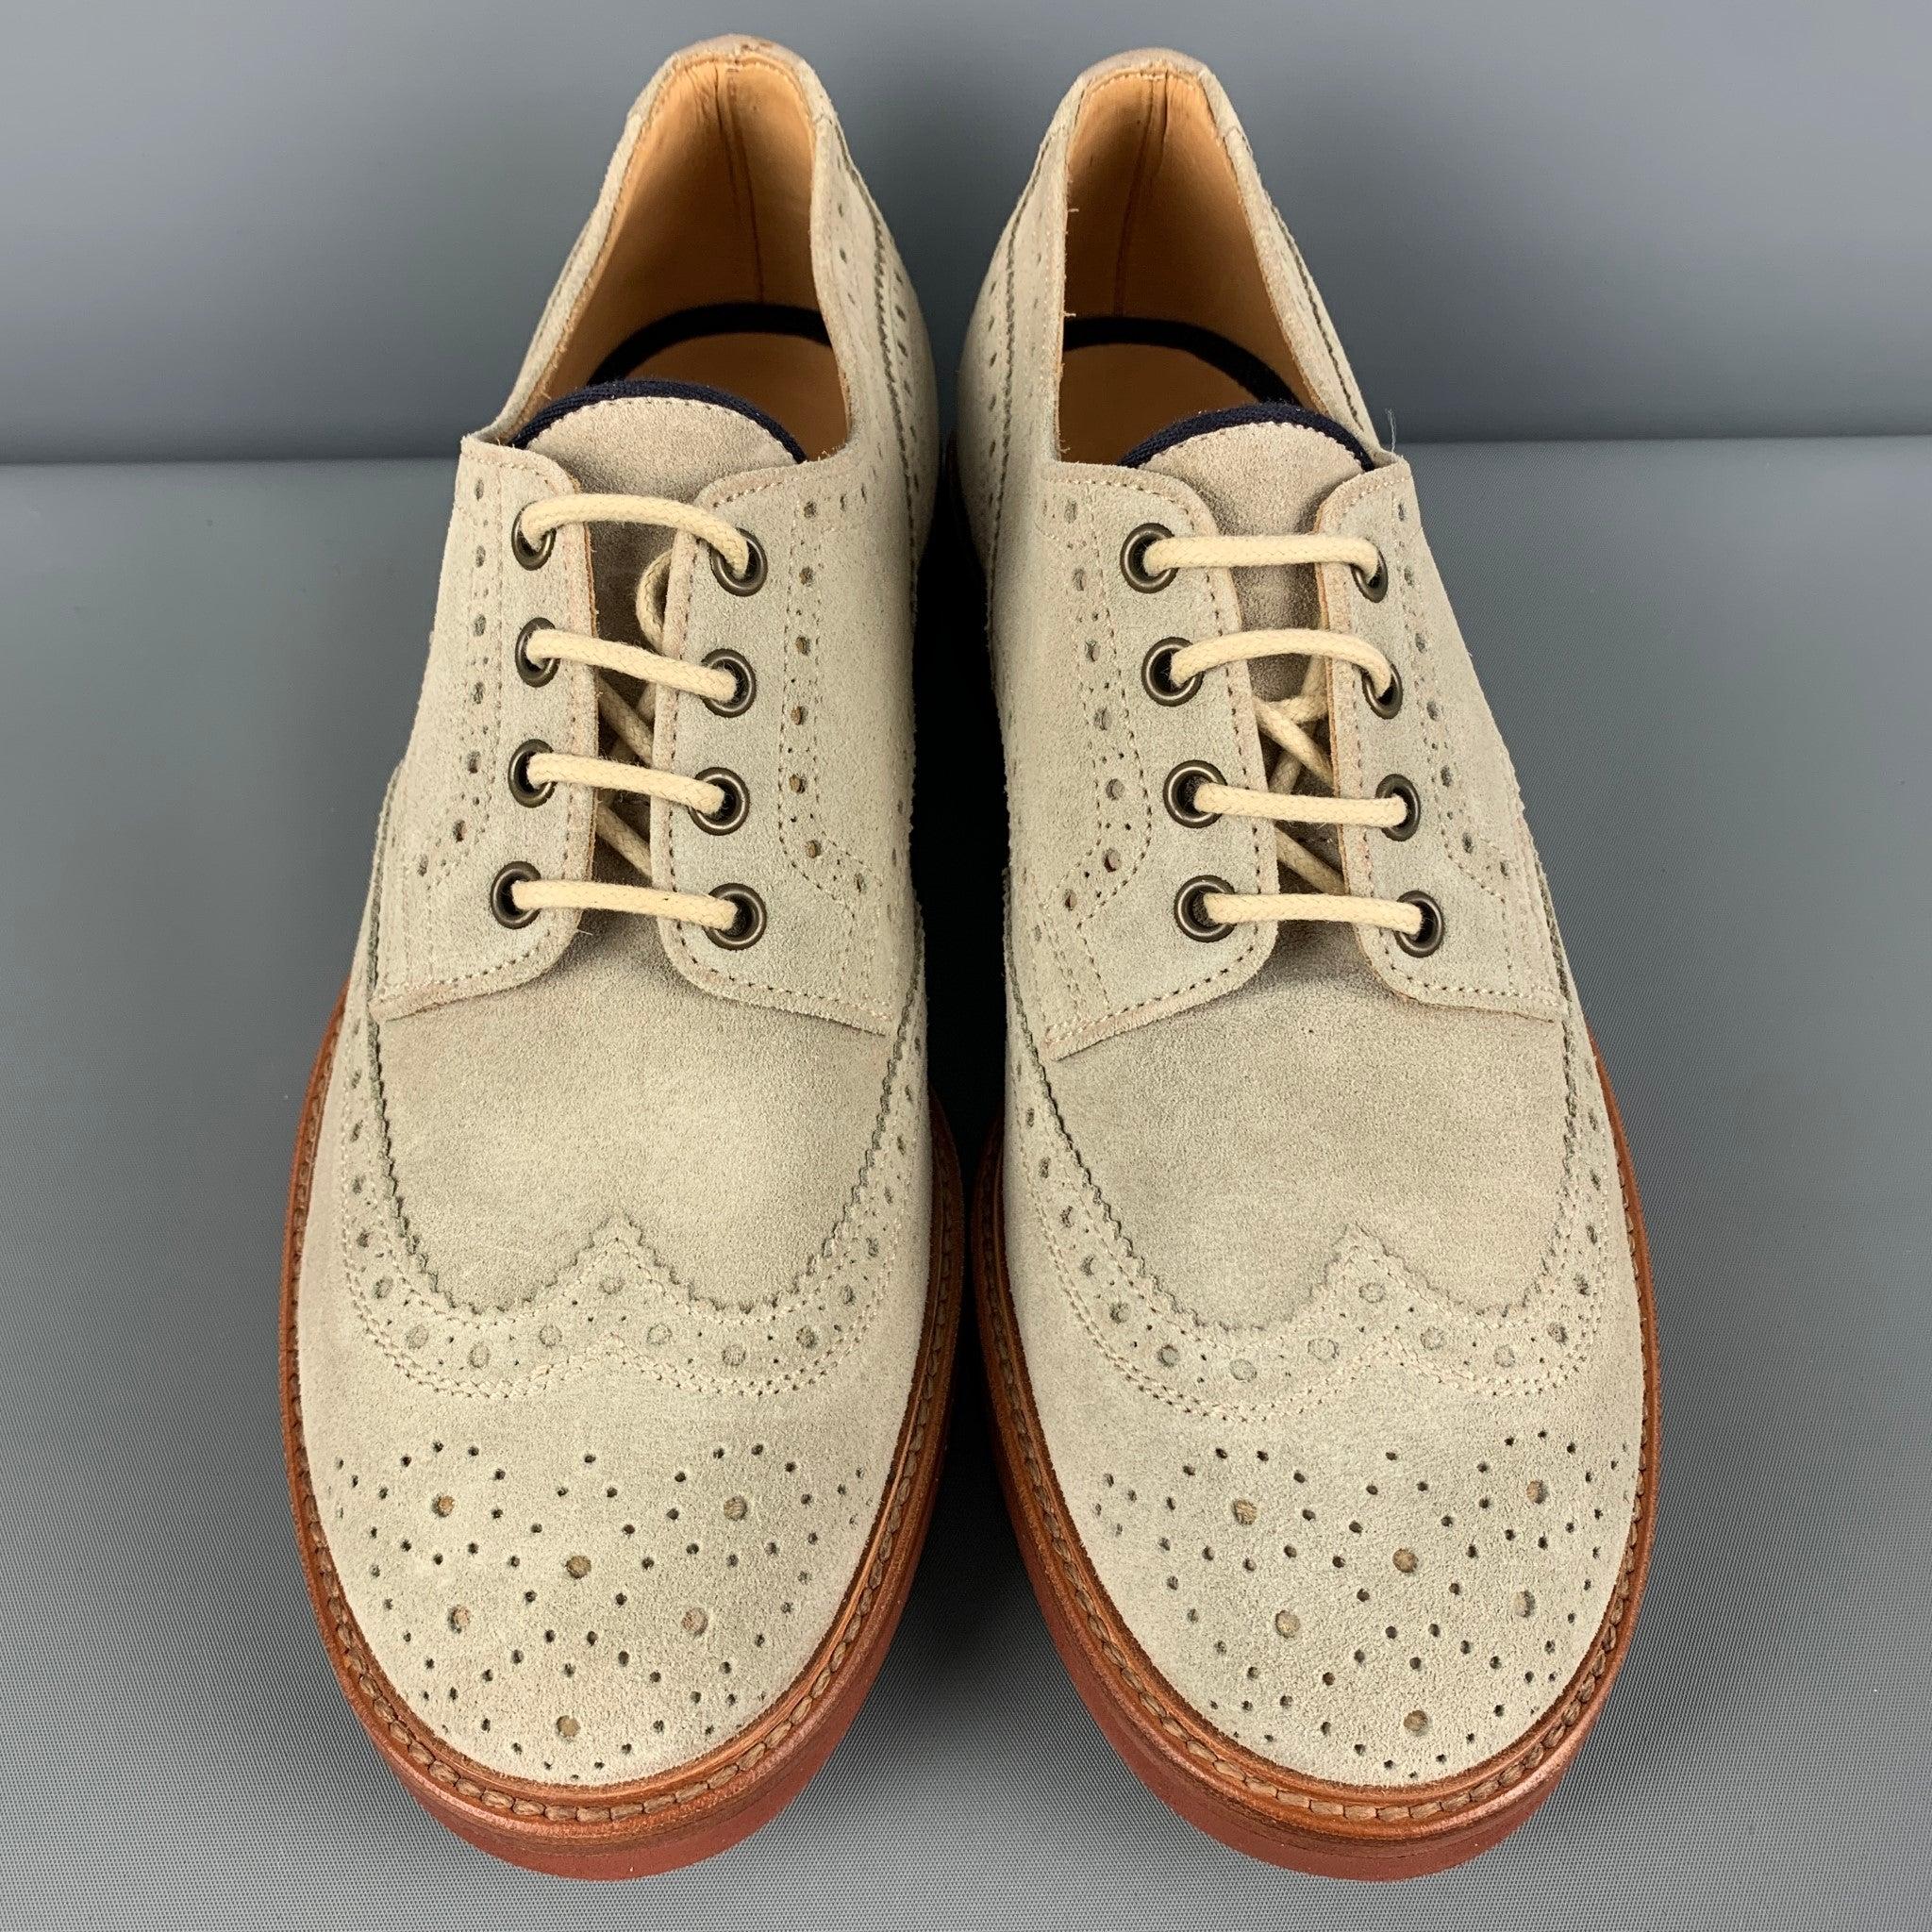 BRUNELLO CUCINELLI Size 9.5 Beige Brown Wingtip Brogue Lace Up Shoes For Sale 1